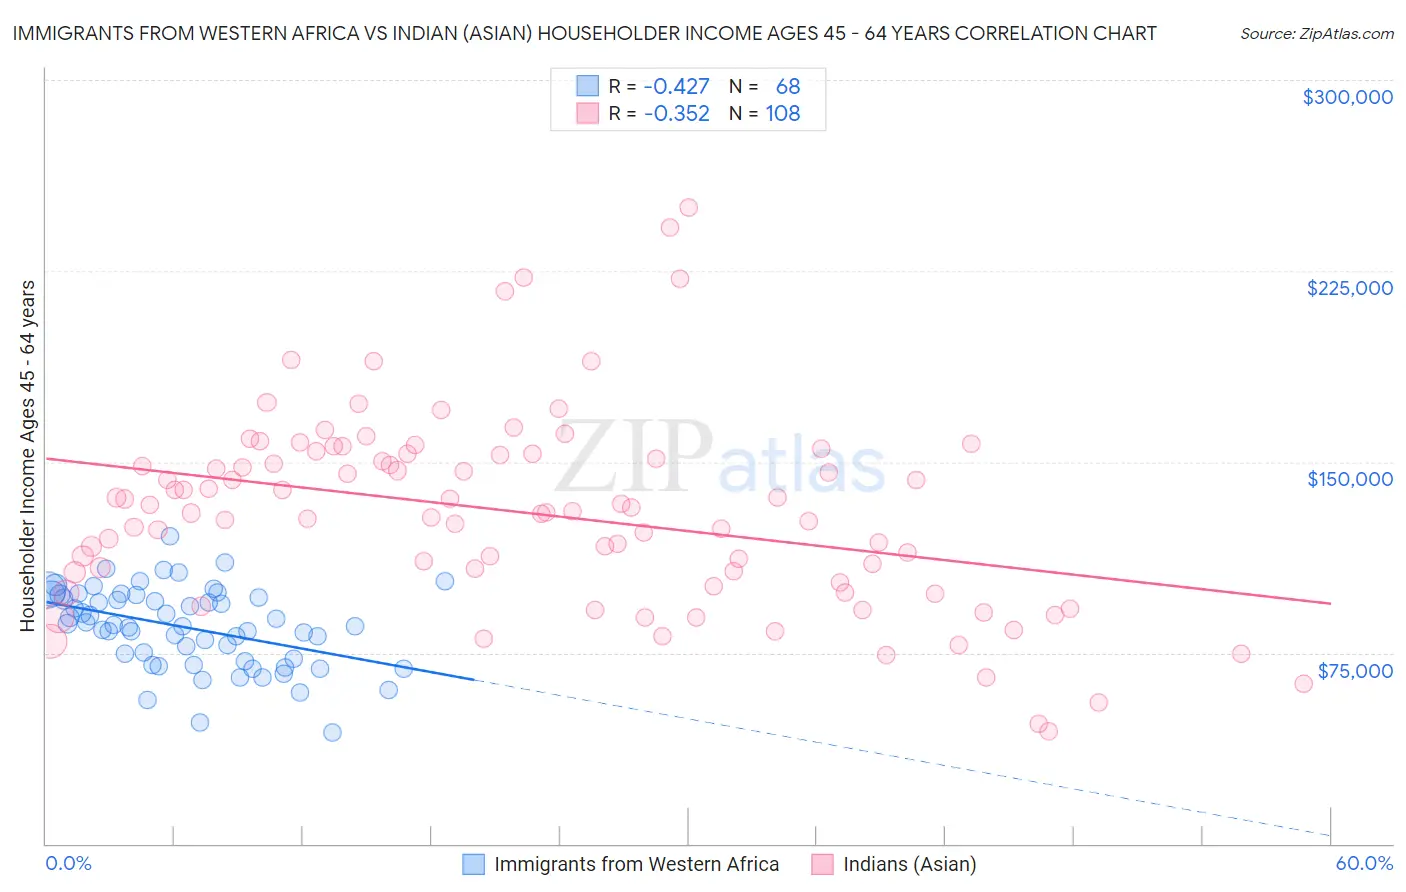 Immigrants from Western Africa vs Indian (Asian) Householder Income Ages 45 - 64 years